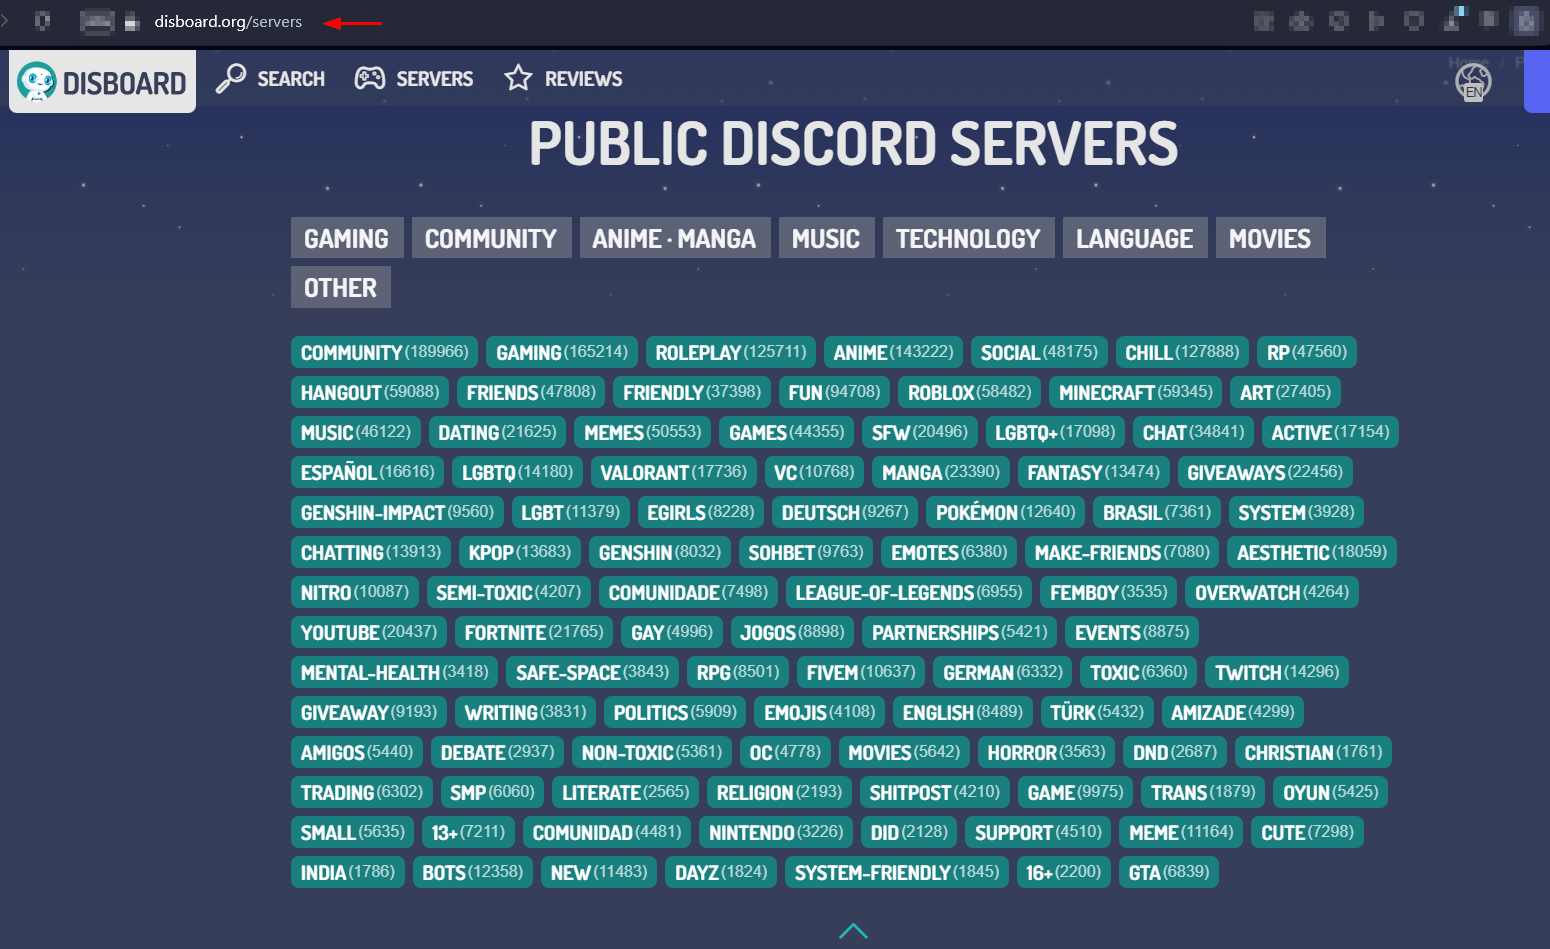 Screenshot of disboard.org with long list of Discord server categories